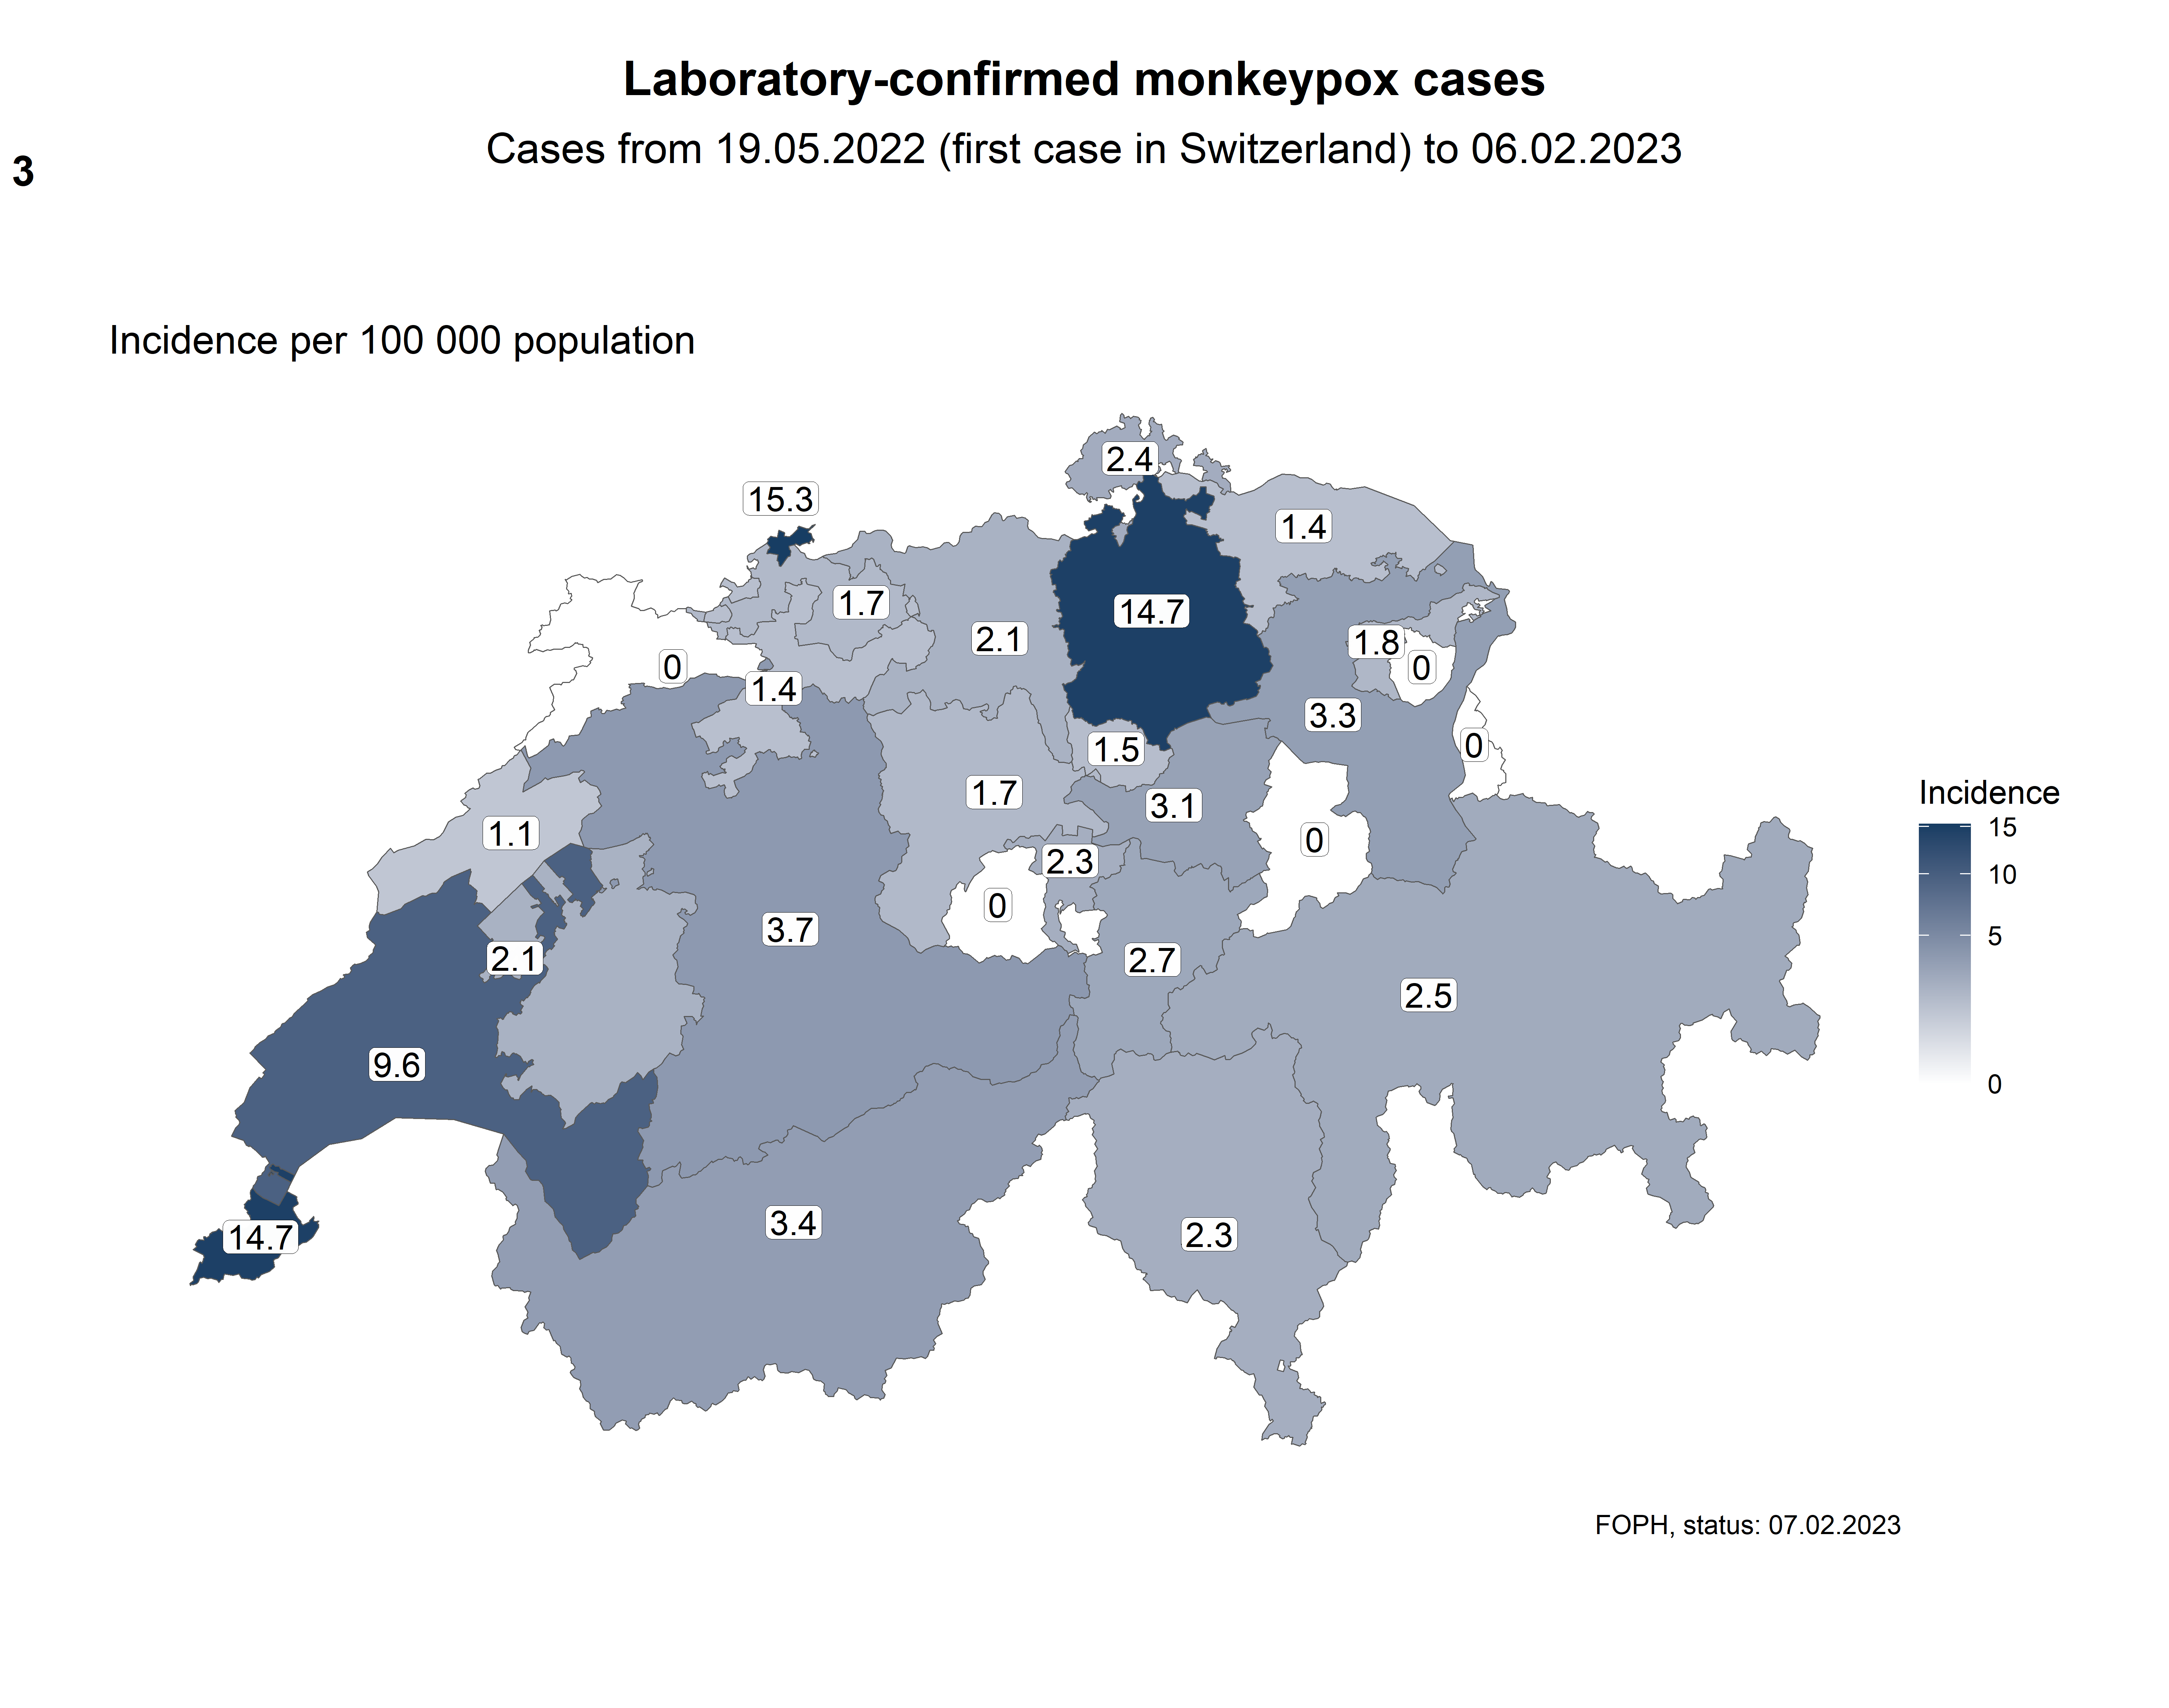 Figure 3: Geographical distribution of laboratory-confirmed monkeypox cases in Switzerland by cantonal incidence rate (cases per 100,000 population) (related data in the Excel table)